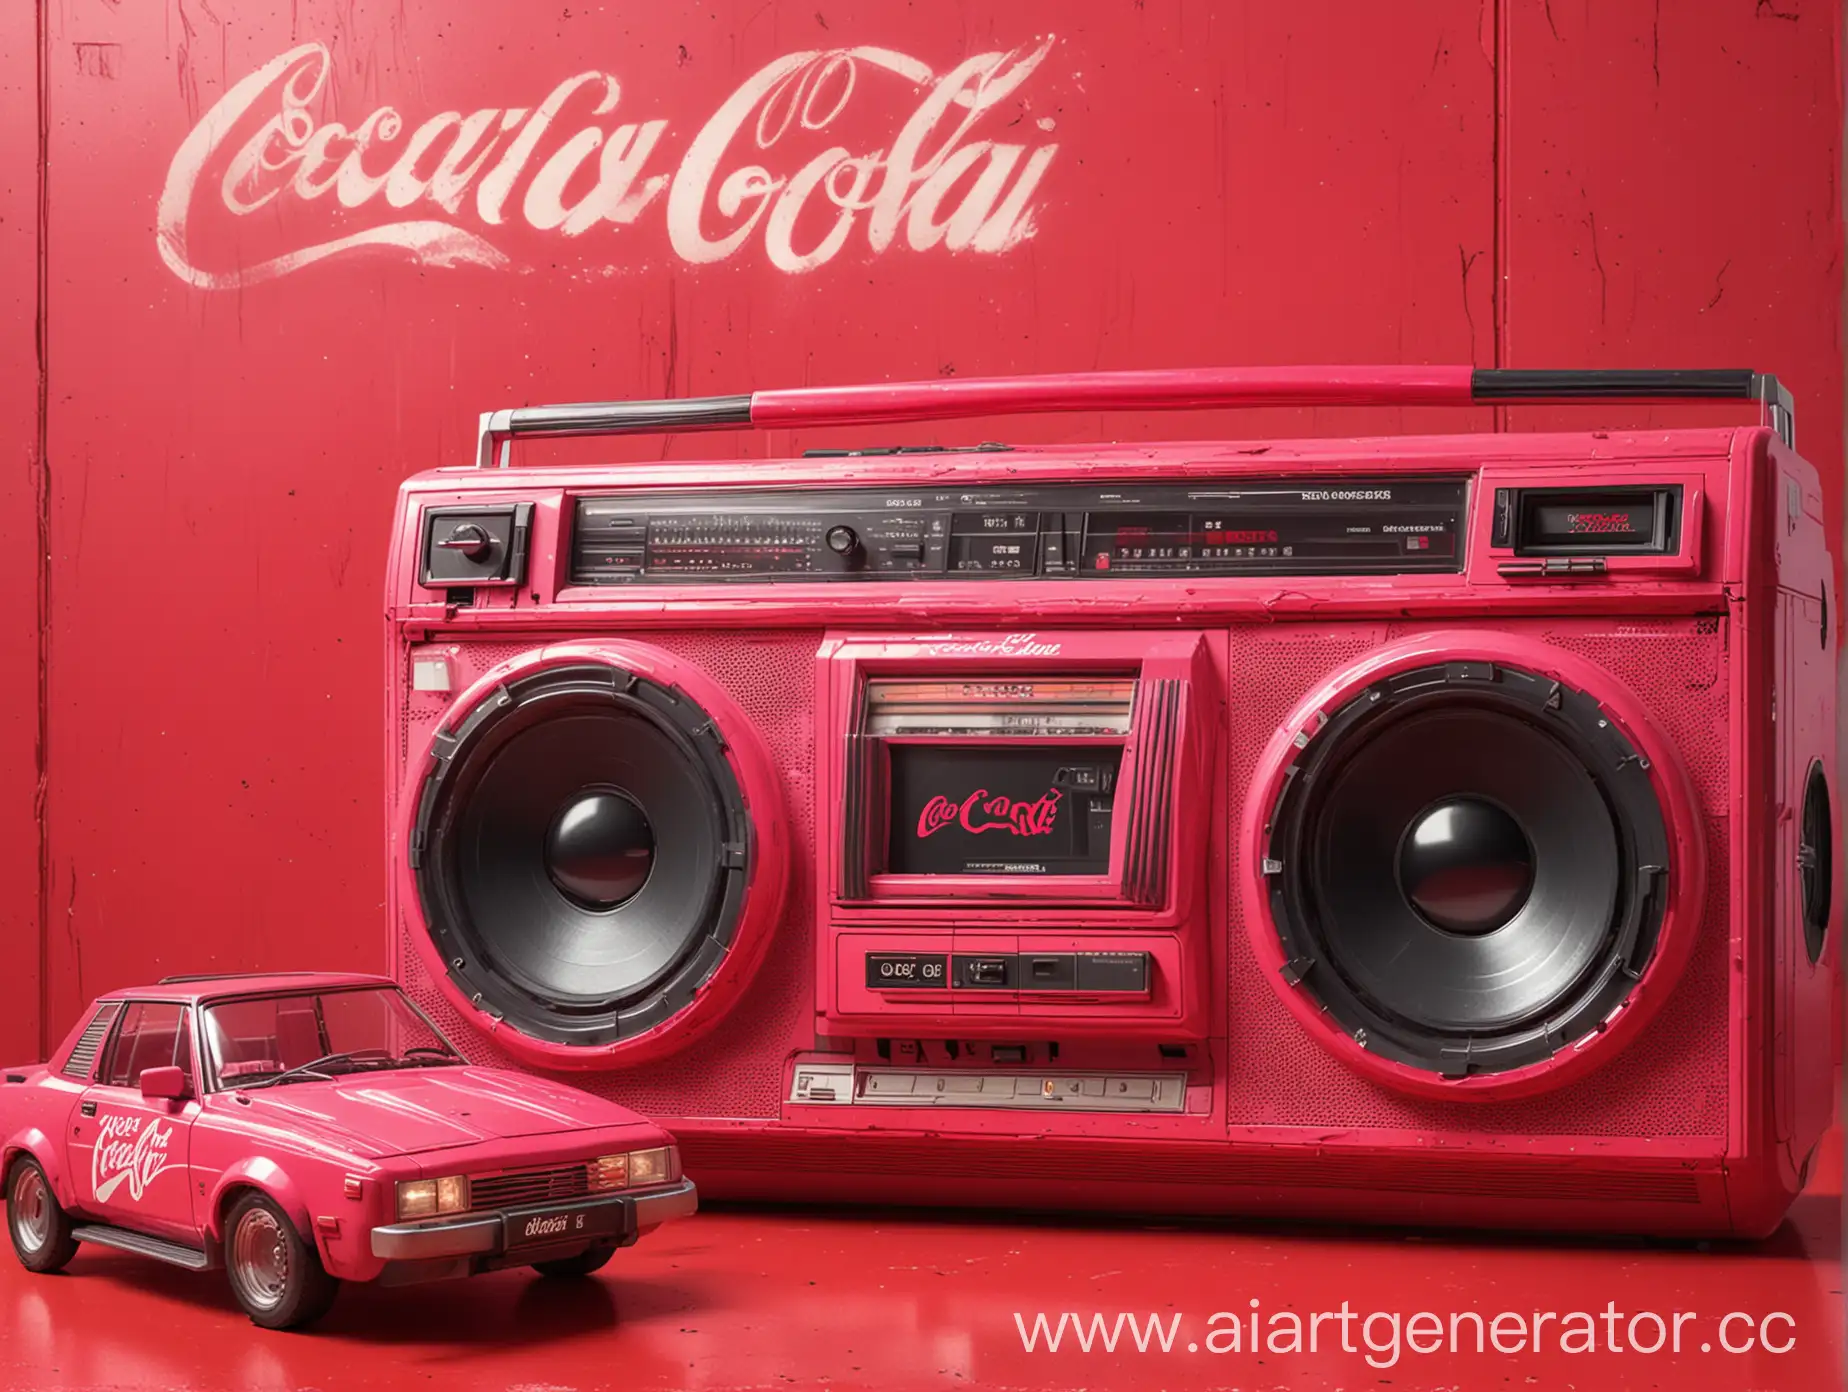 A bright pink round 1980s boombox on the background of a large red Coca-Cola poster. Old photo, photorealistic.